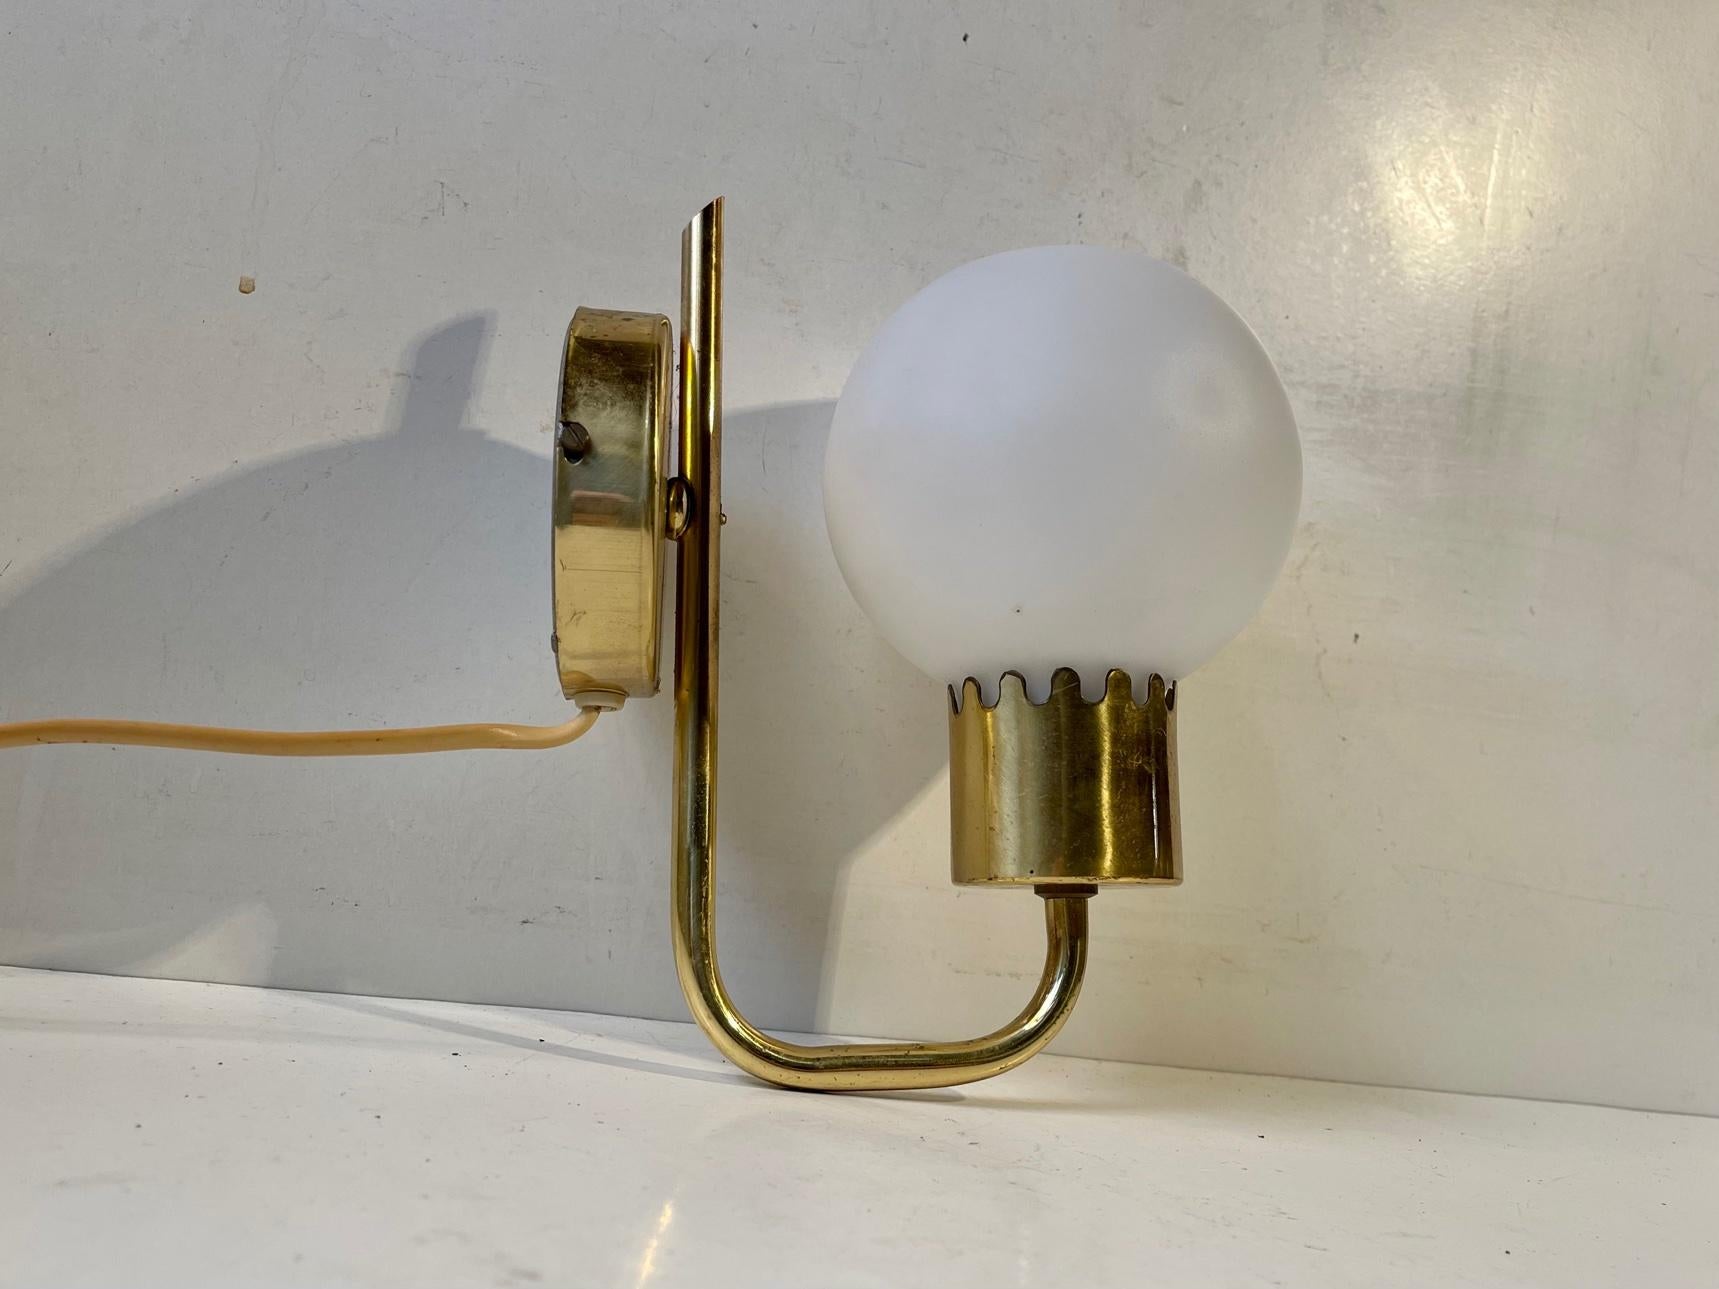 A Paavo Tynell or Hans Agne Jakobsson inspired wall light. Its composed of solid brass and features a round shade in cased opaline glass. Designed and manufactured by Nya öia in Sweden during the 1960s. Measurements: Height 20, dept: 17, Shade